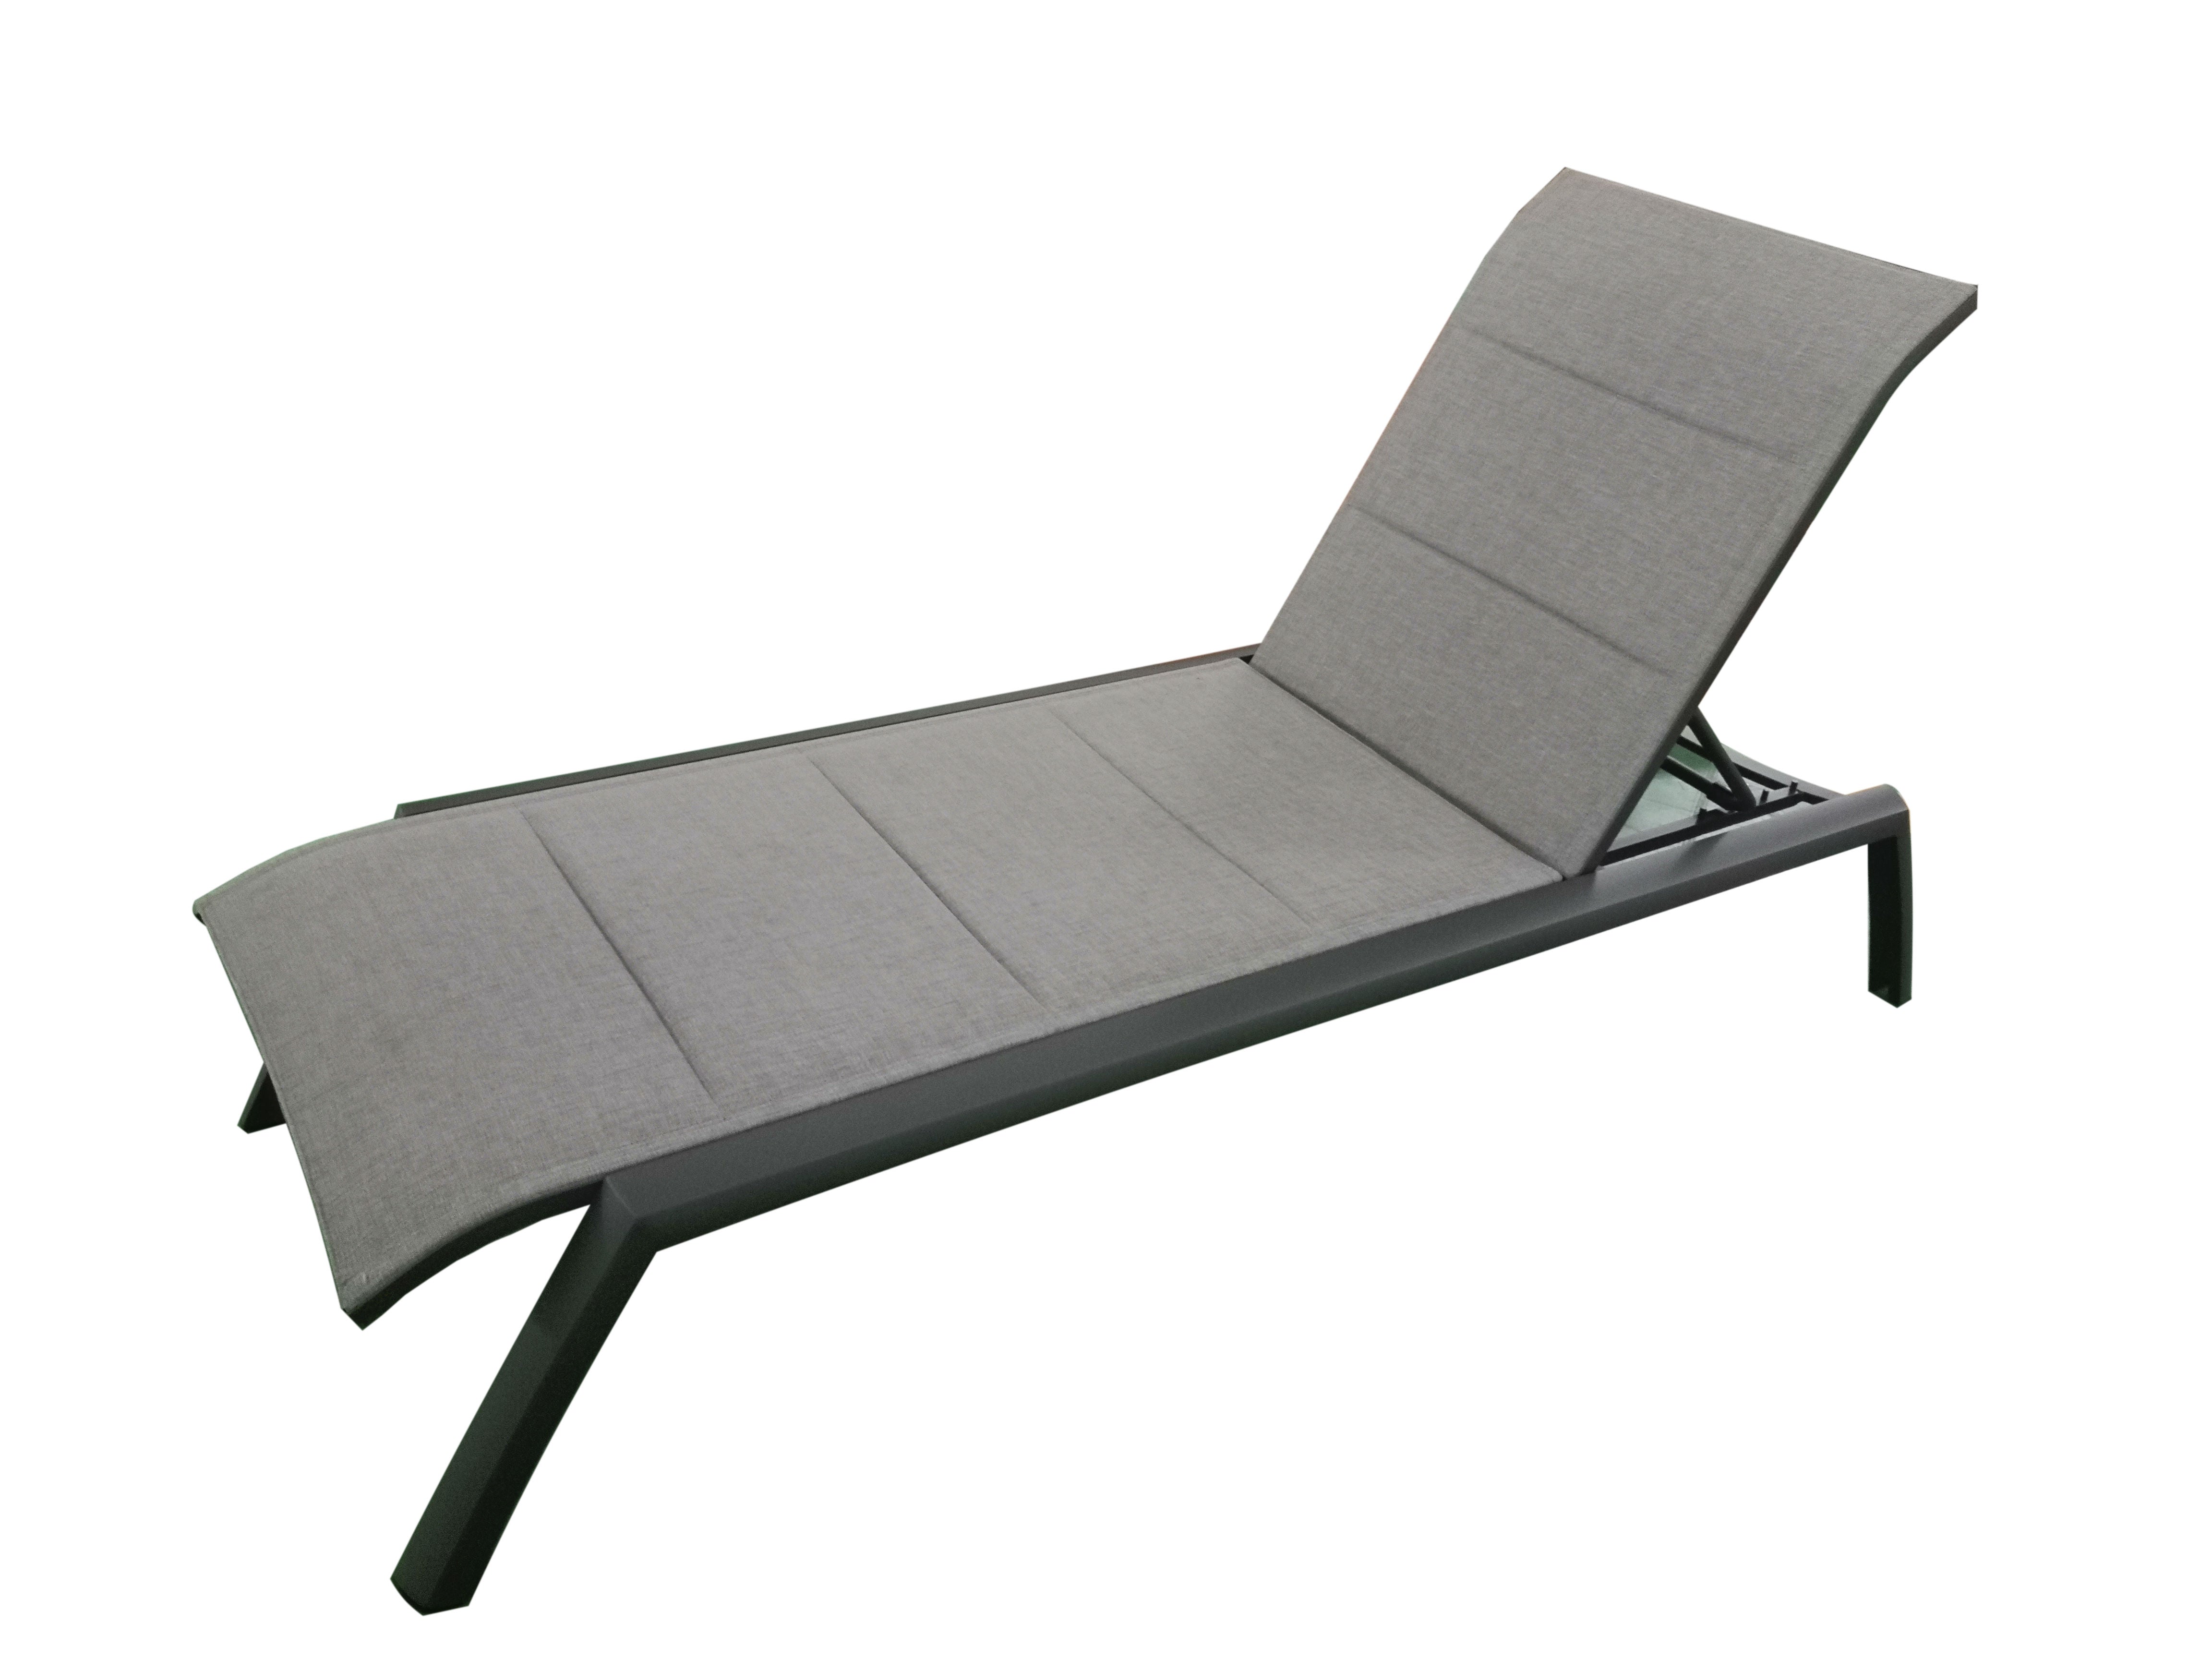 MOSS MOSS-0445GM - Akumal Collection, Charcoal matte aluminum reclining & stackable lounger chair with convenient small back wheels & with grey mix quick dry padded textilene 28 1/2" x 80" x H 14"